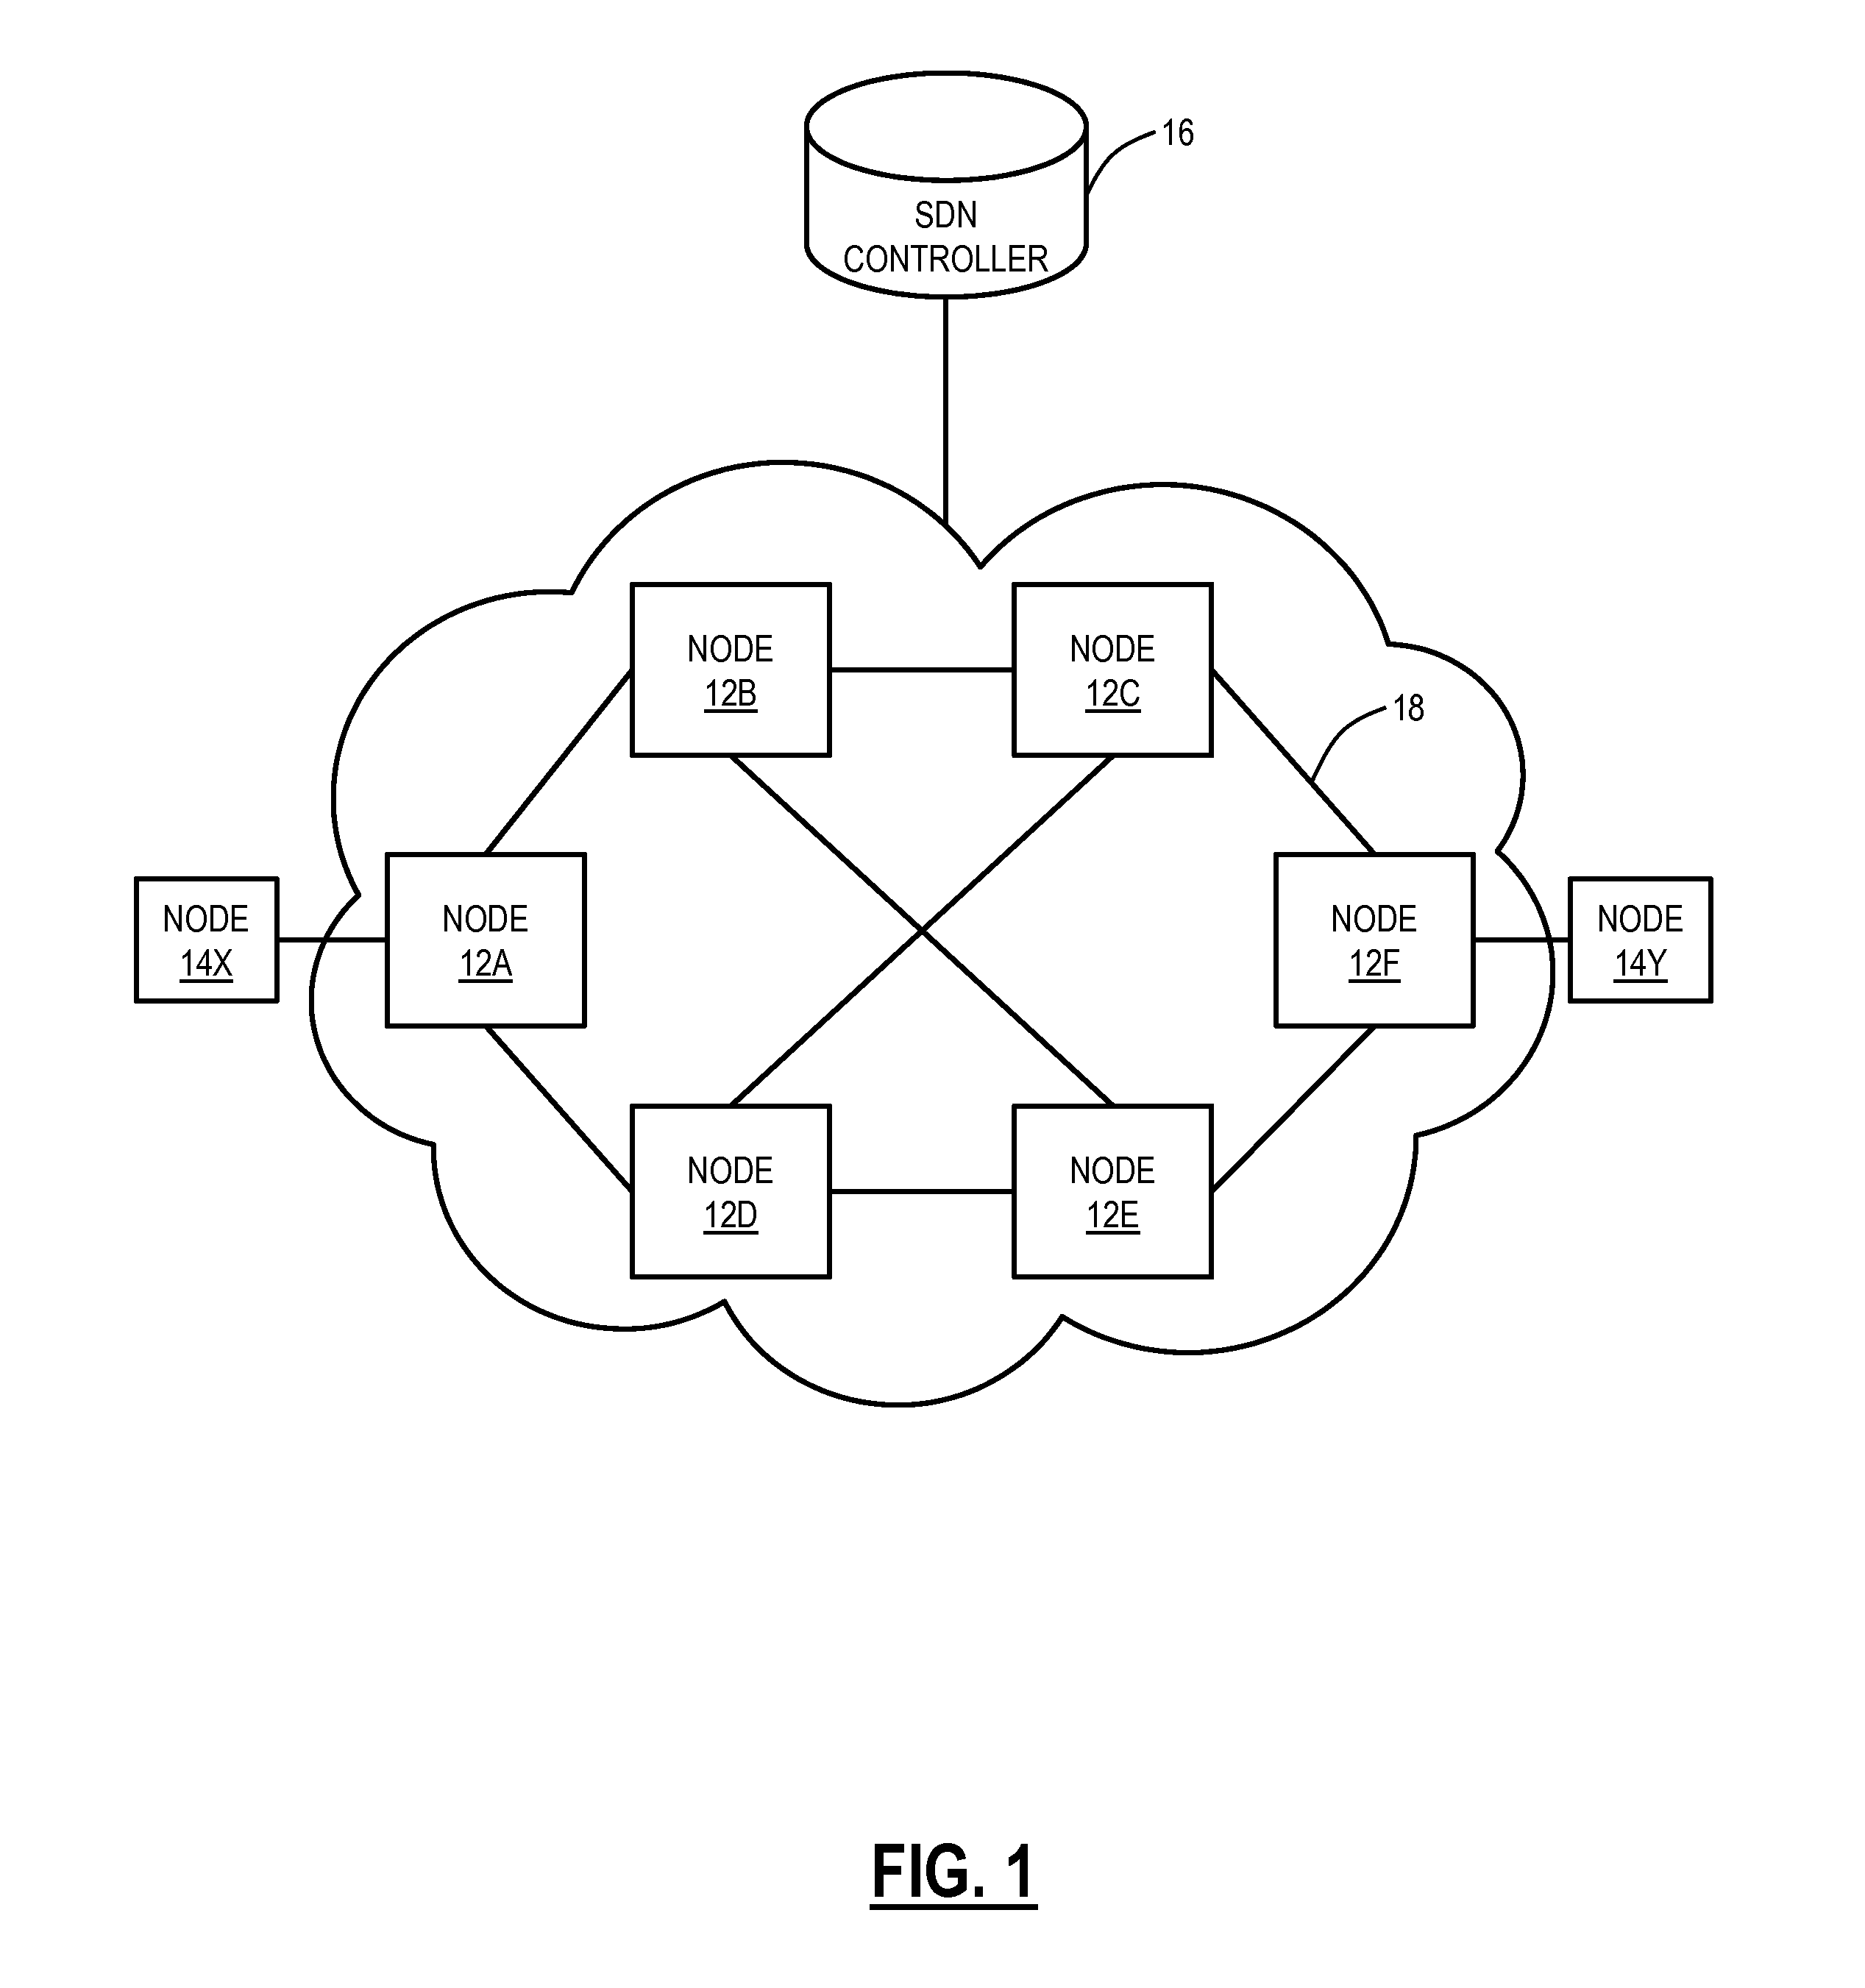 Otn switching systems and methods using an SDN controller and match/action rules